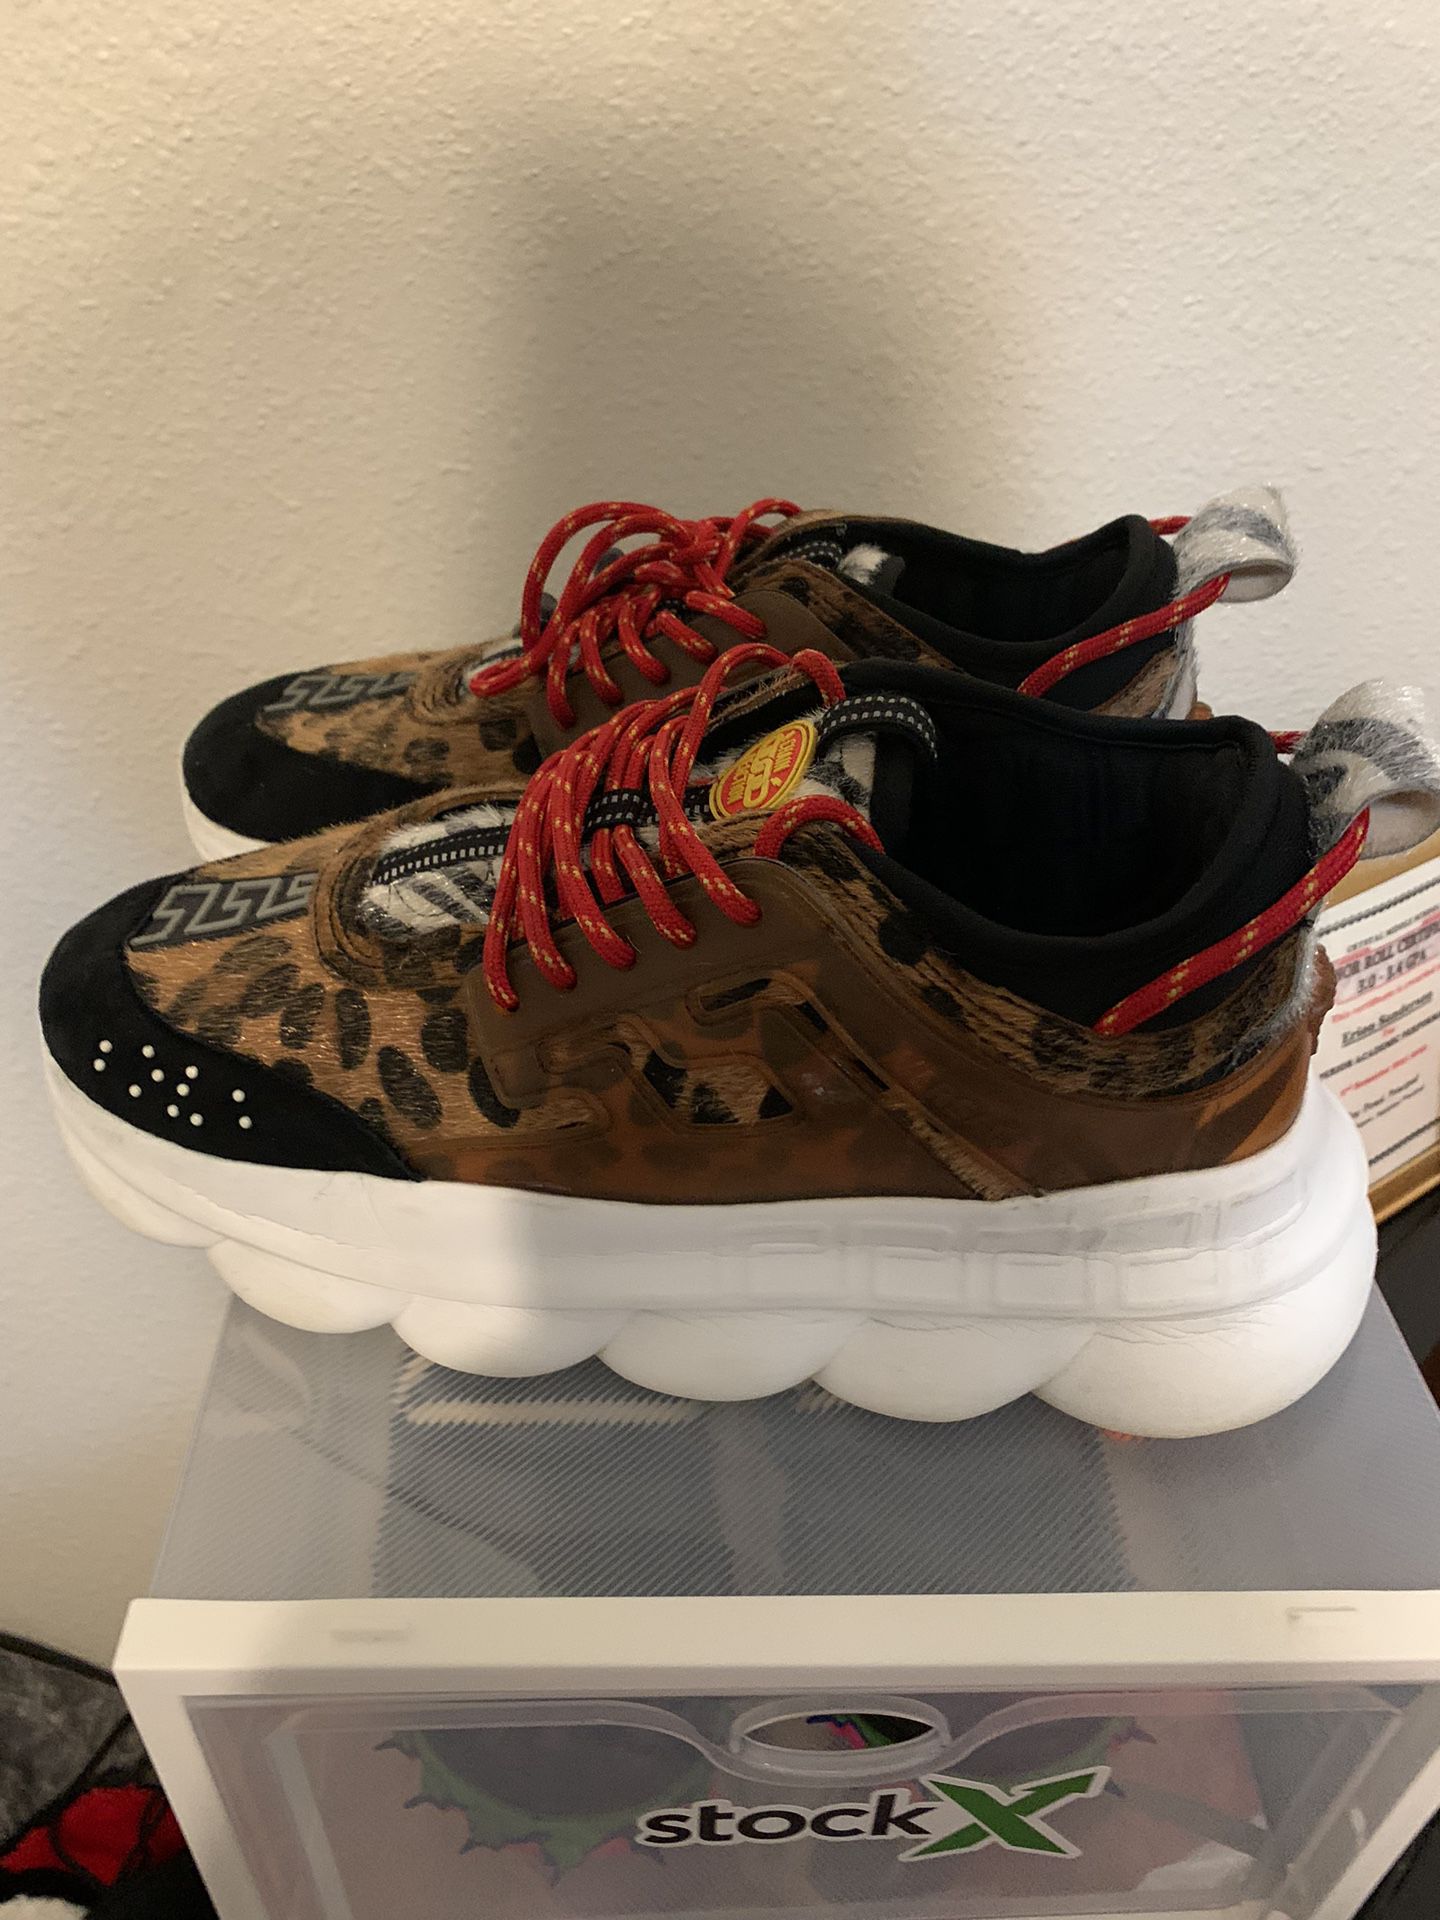 Versace, Shoes, 2 Chainz X Versace Chain Reaction Sneakers